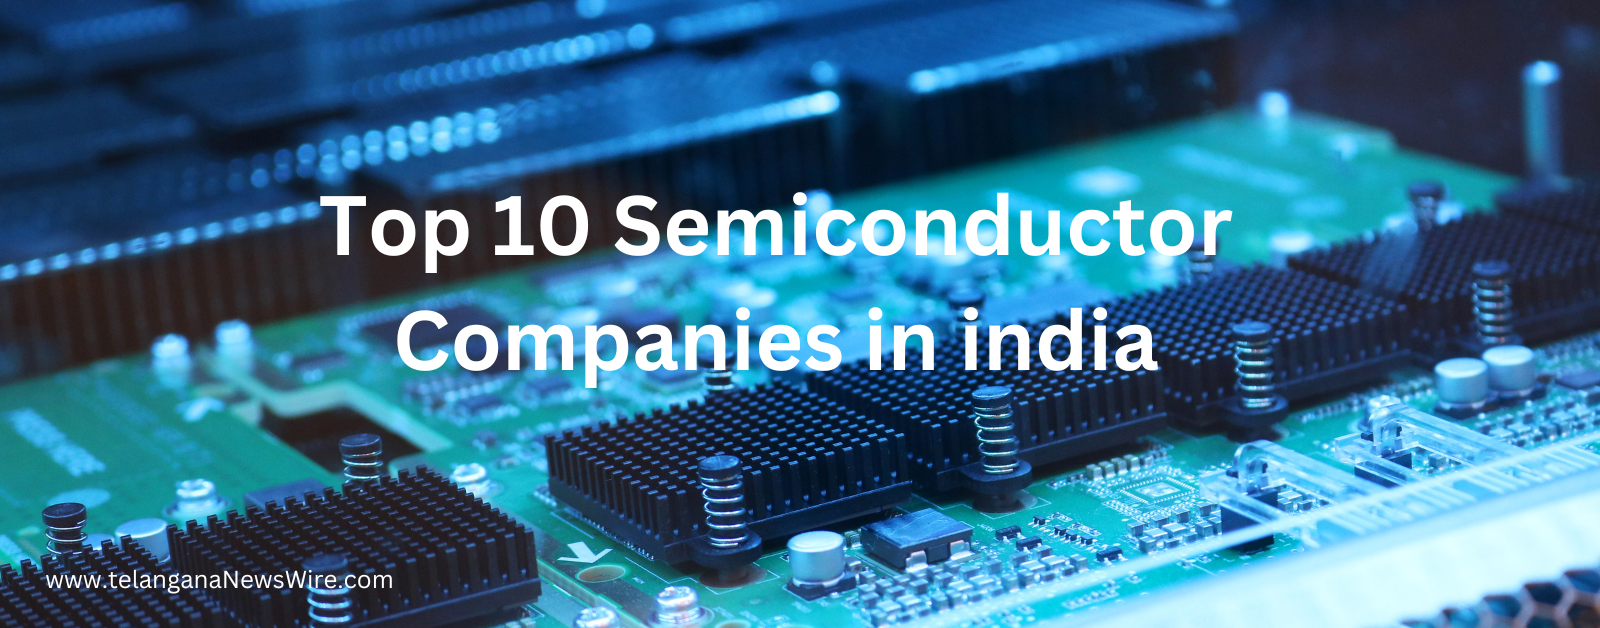 Top 10 semiconductor companies in India